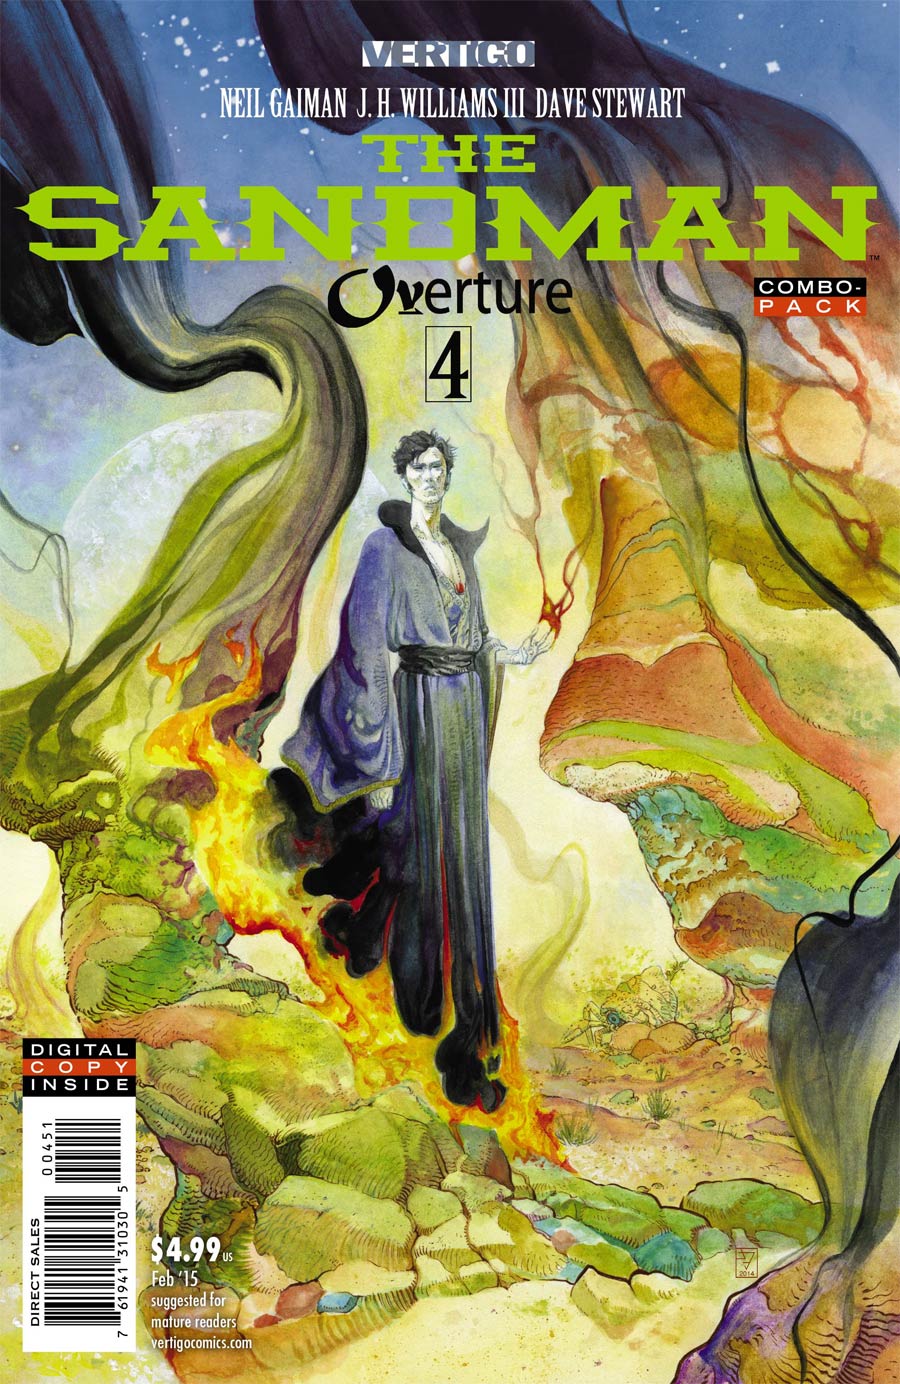 Sandman Overture #4 Cover D Combo Pack Without Polybag